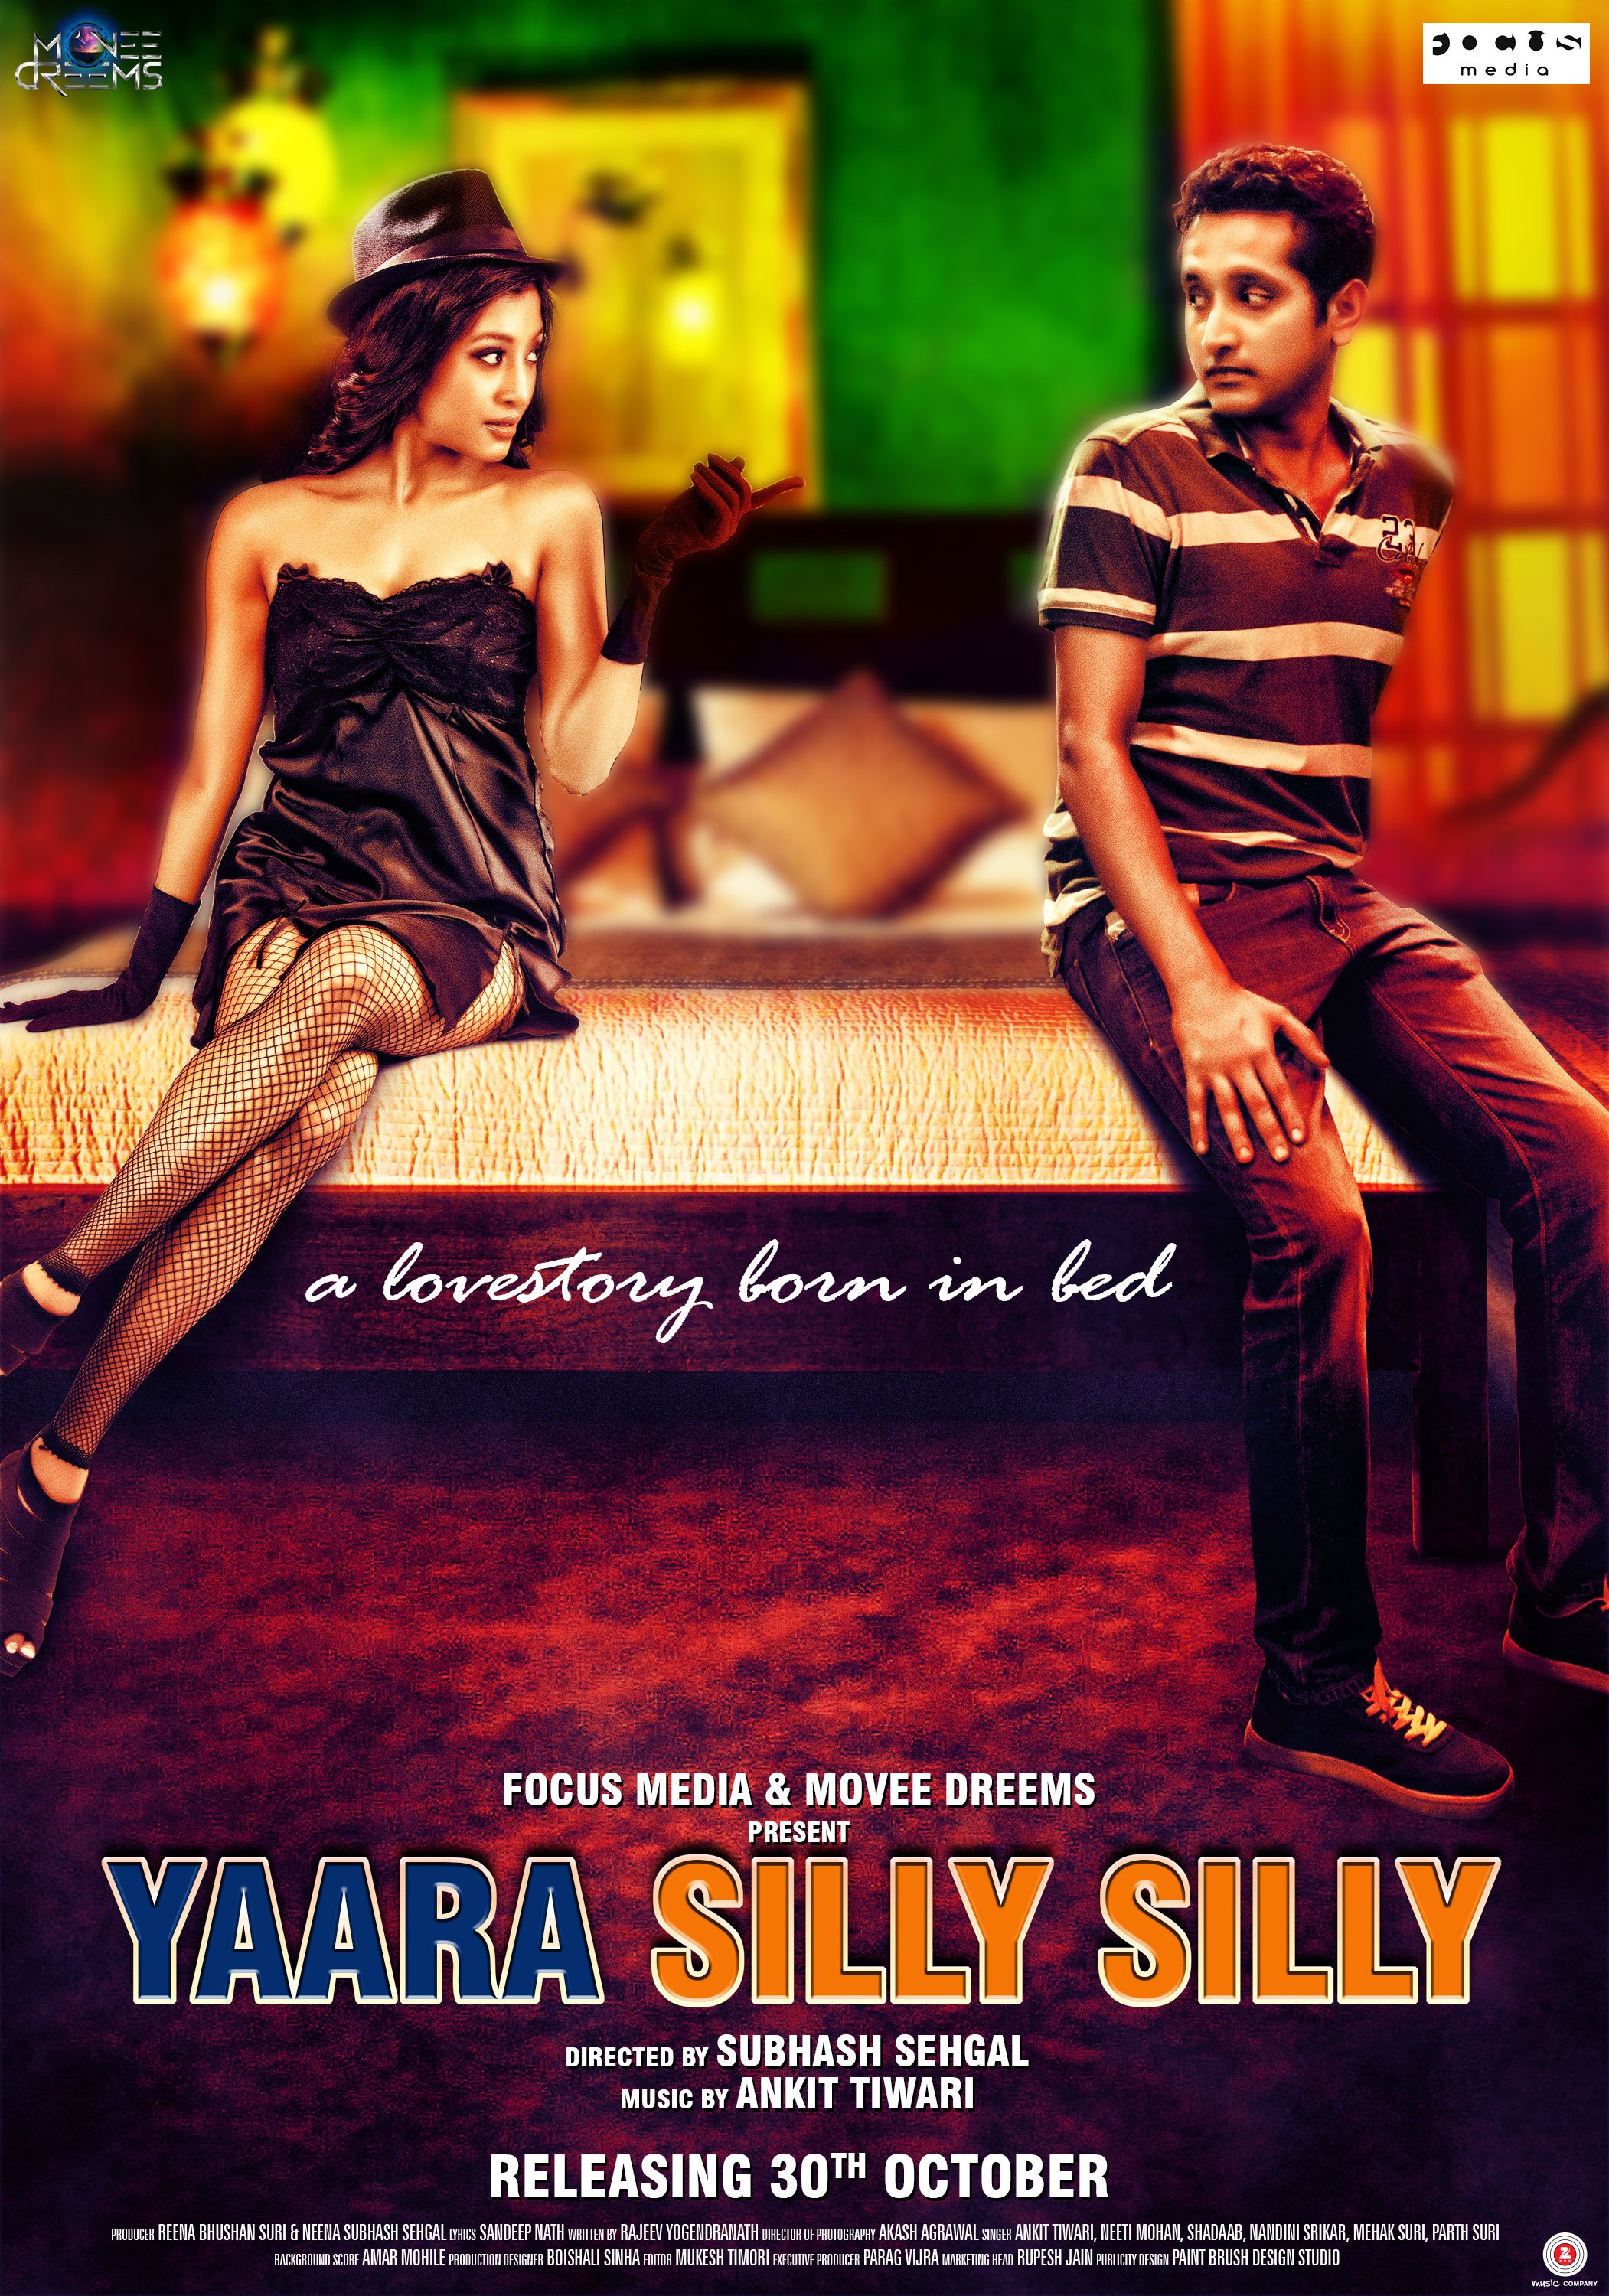 Yaara Silly Silly Movie Poster